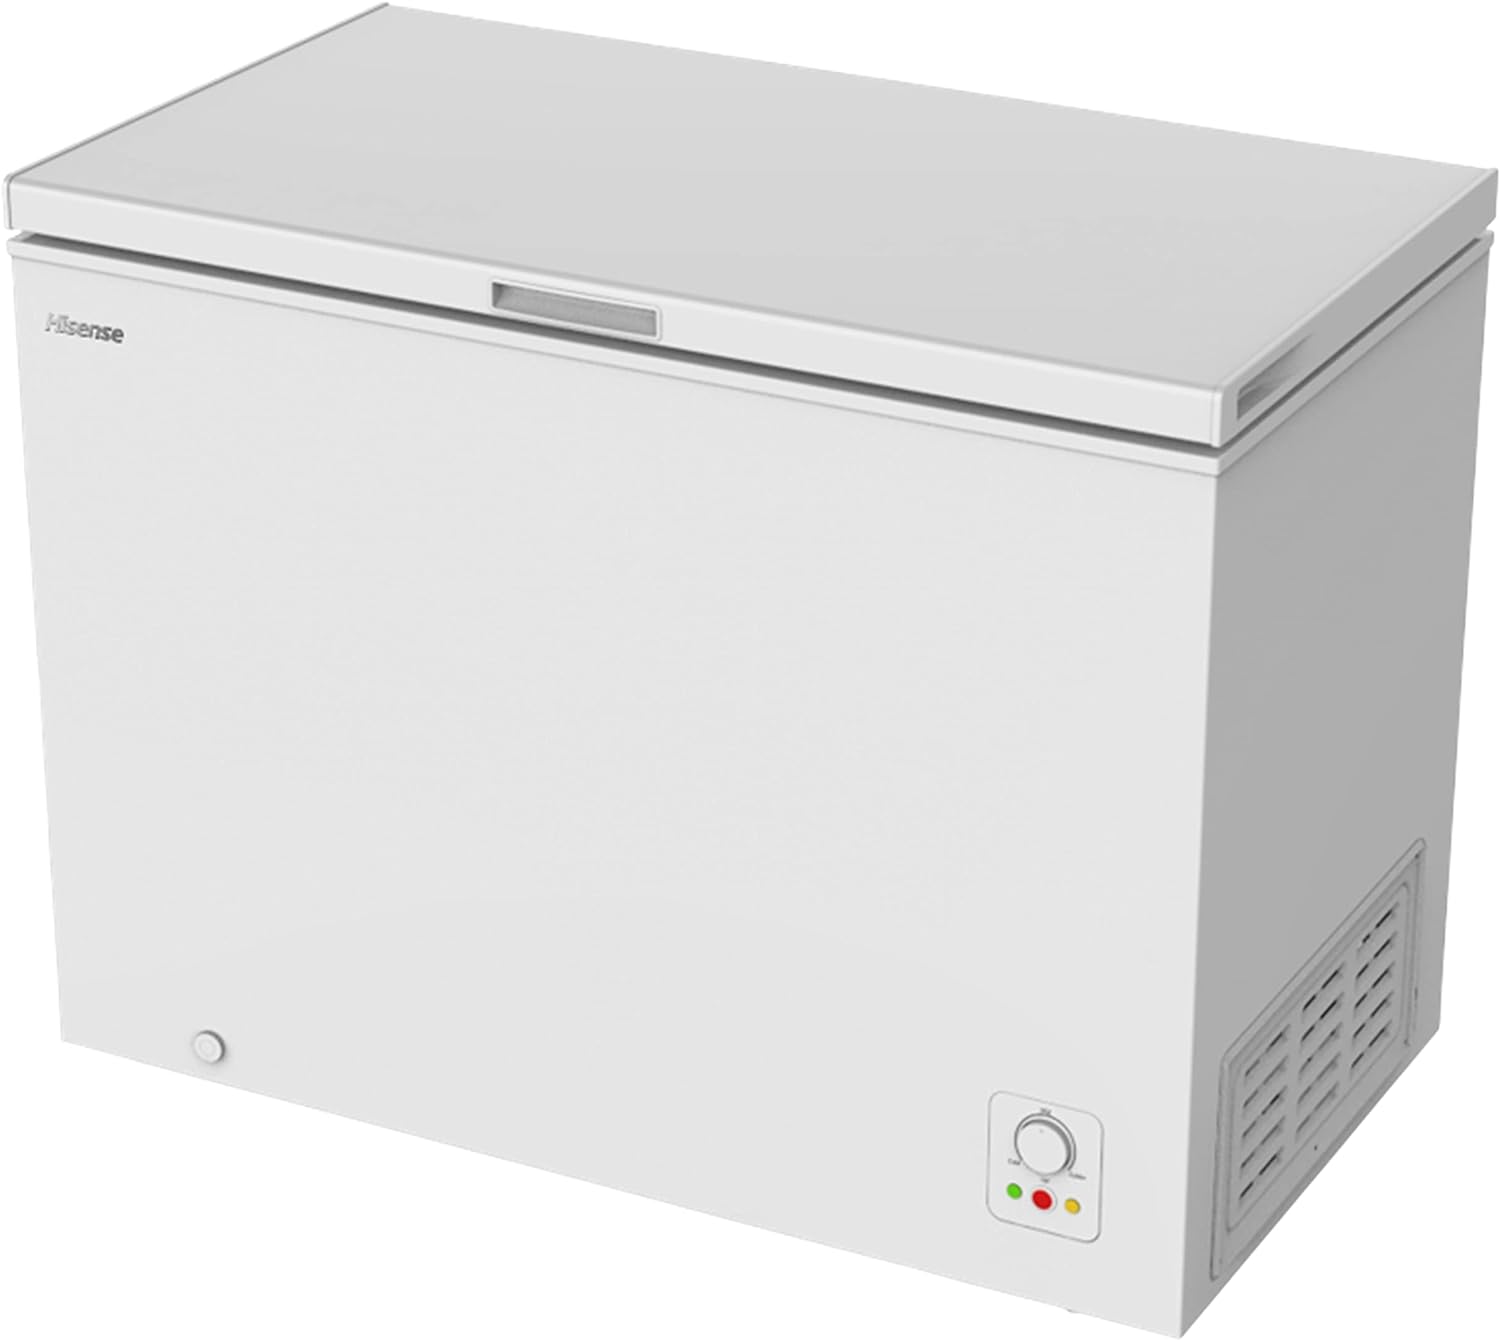 Hisense FC252D4BW1, 198L, Freestanding Chest Freezer, 4 Star Freezer Rating, F Rated in White [Energy Class F]